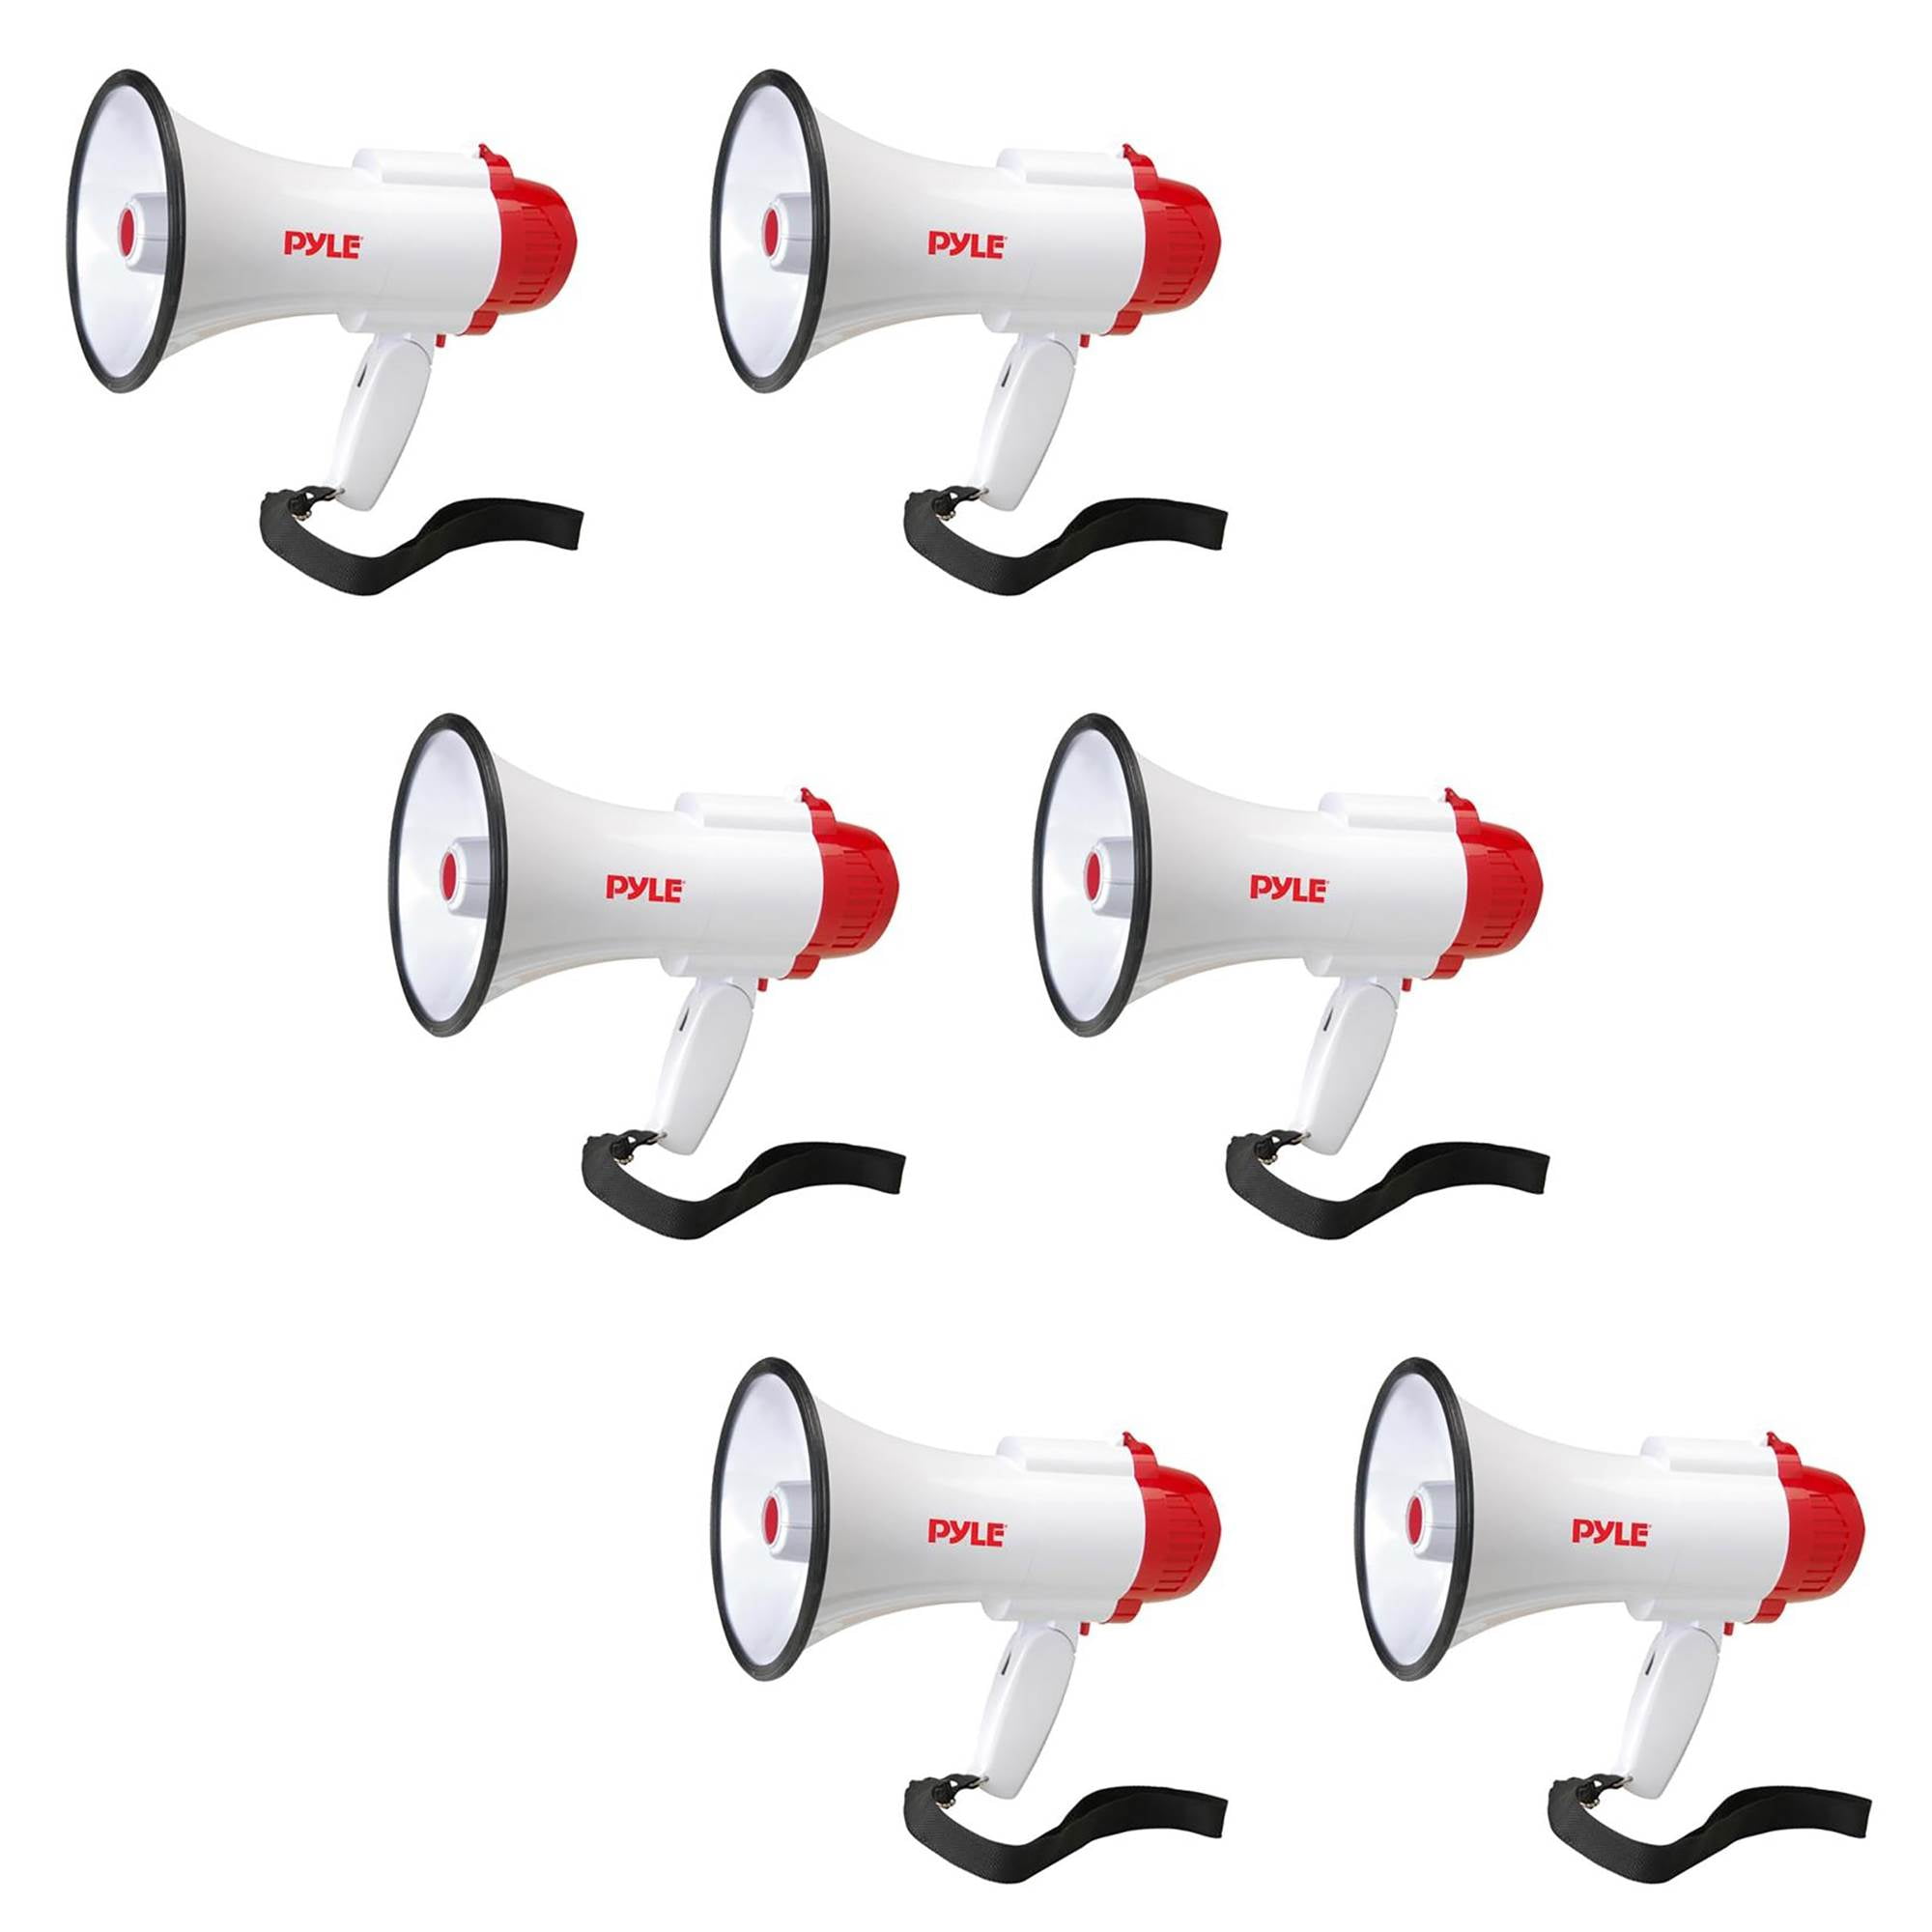 Pyle Pro Handheld Megaphone Bull Horn with Siren and Voice RecorderPMP35R 